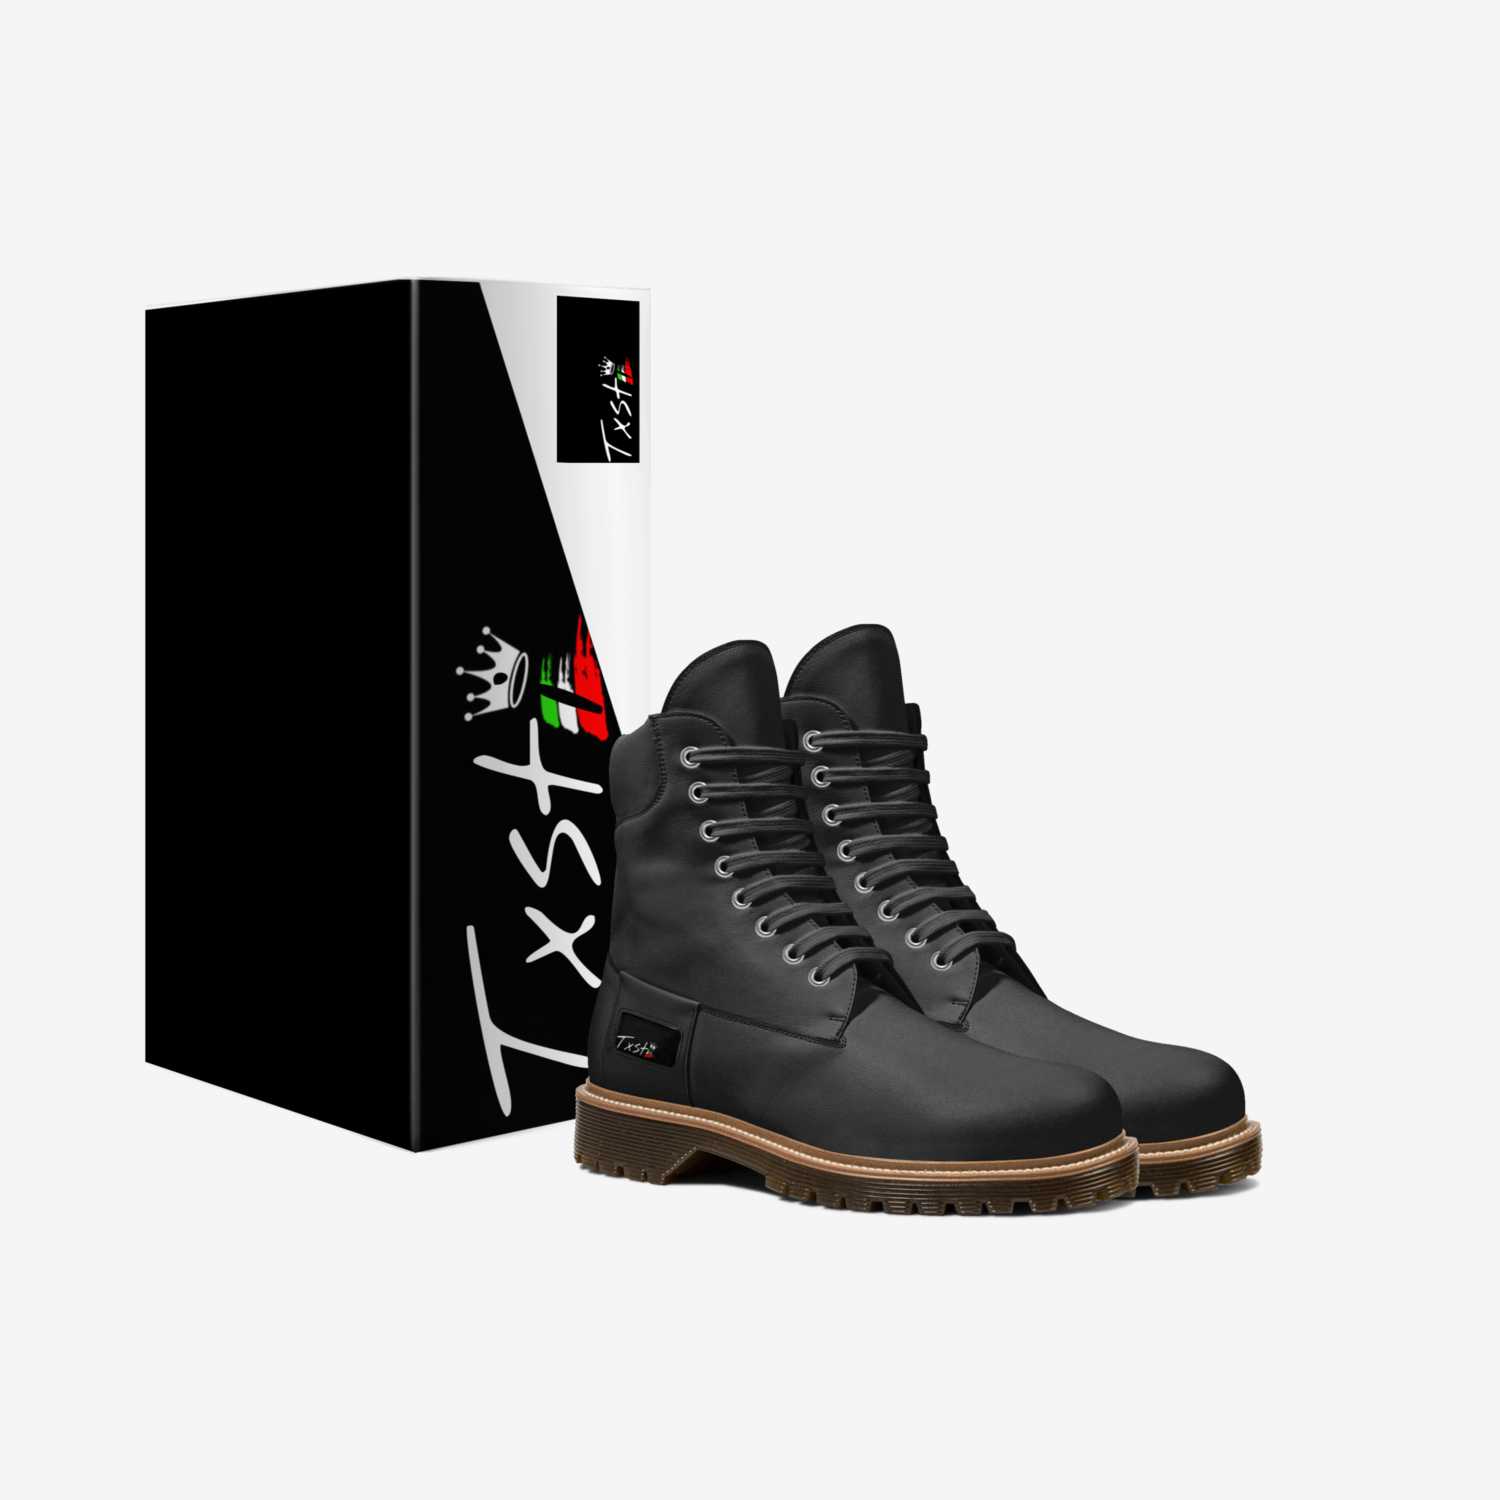 Txsti.004 custom made in Italy shoes by James Tosti | Box view